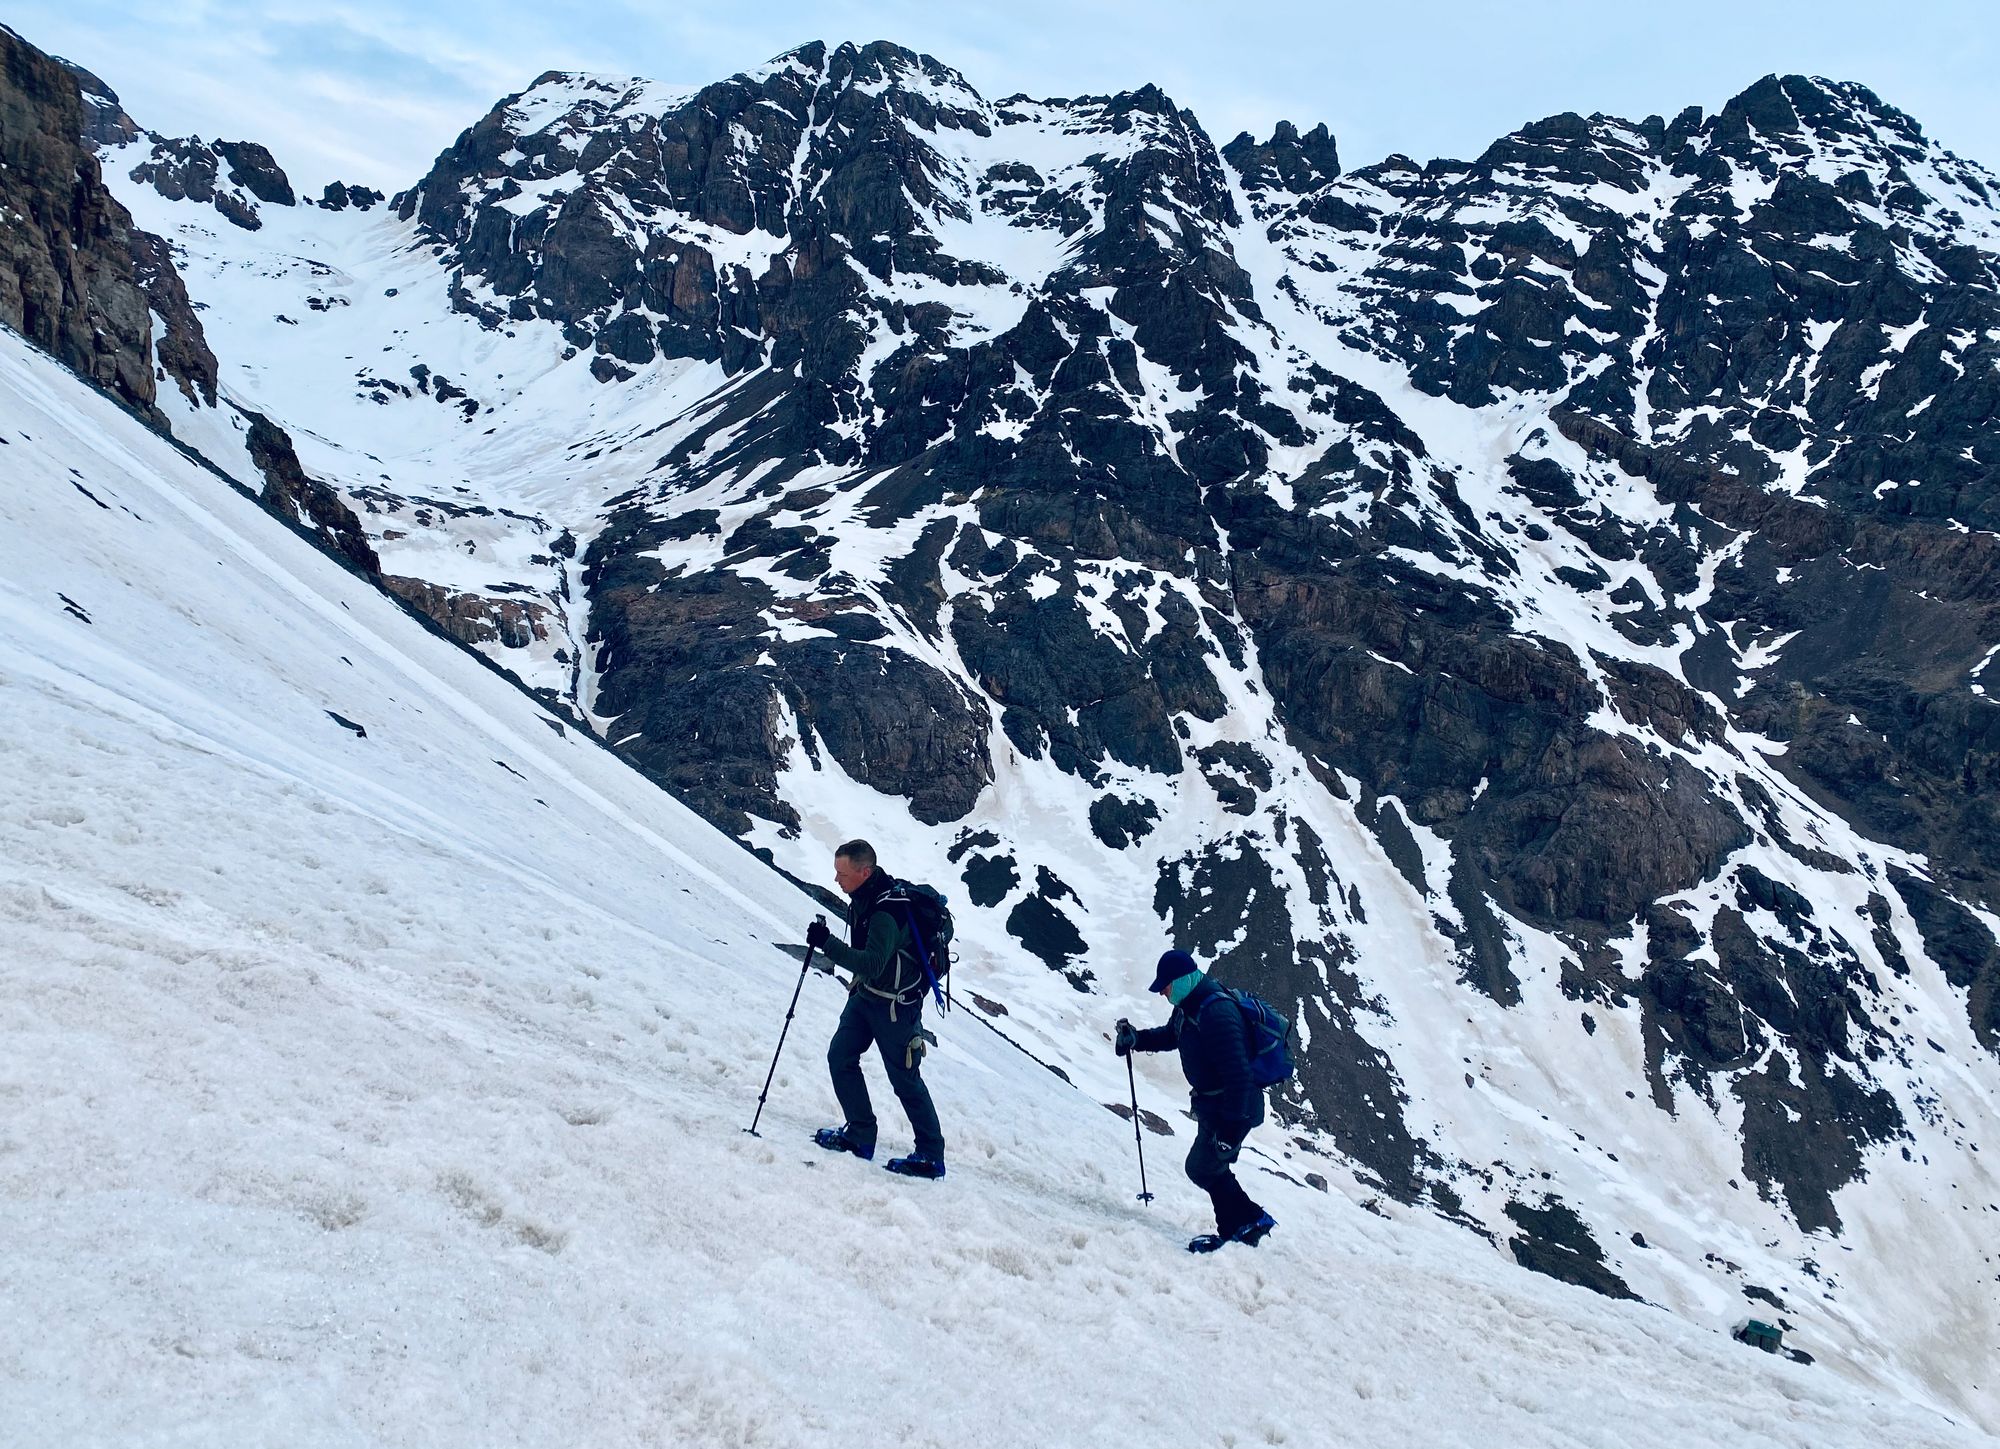 Hikers in crampons tackling the steep, snowy path up Toubkal